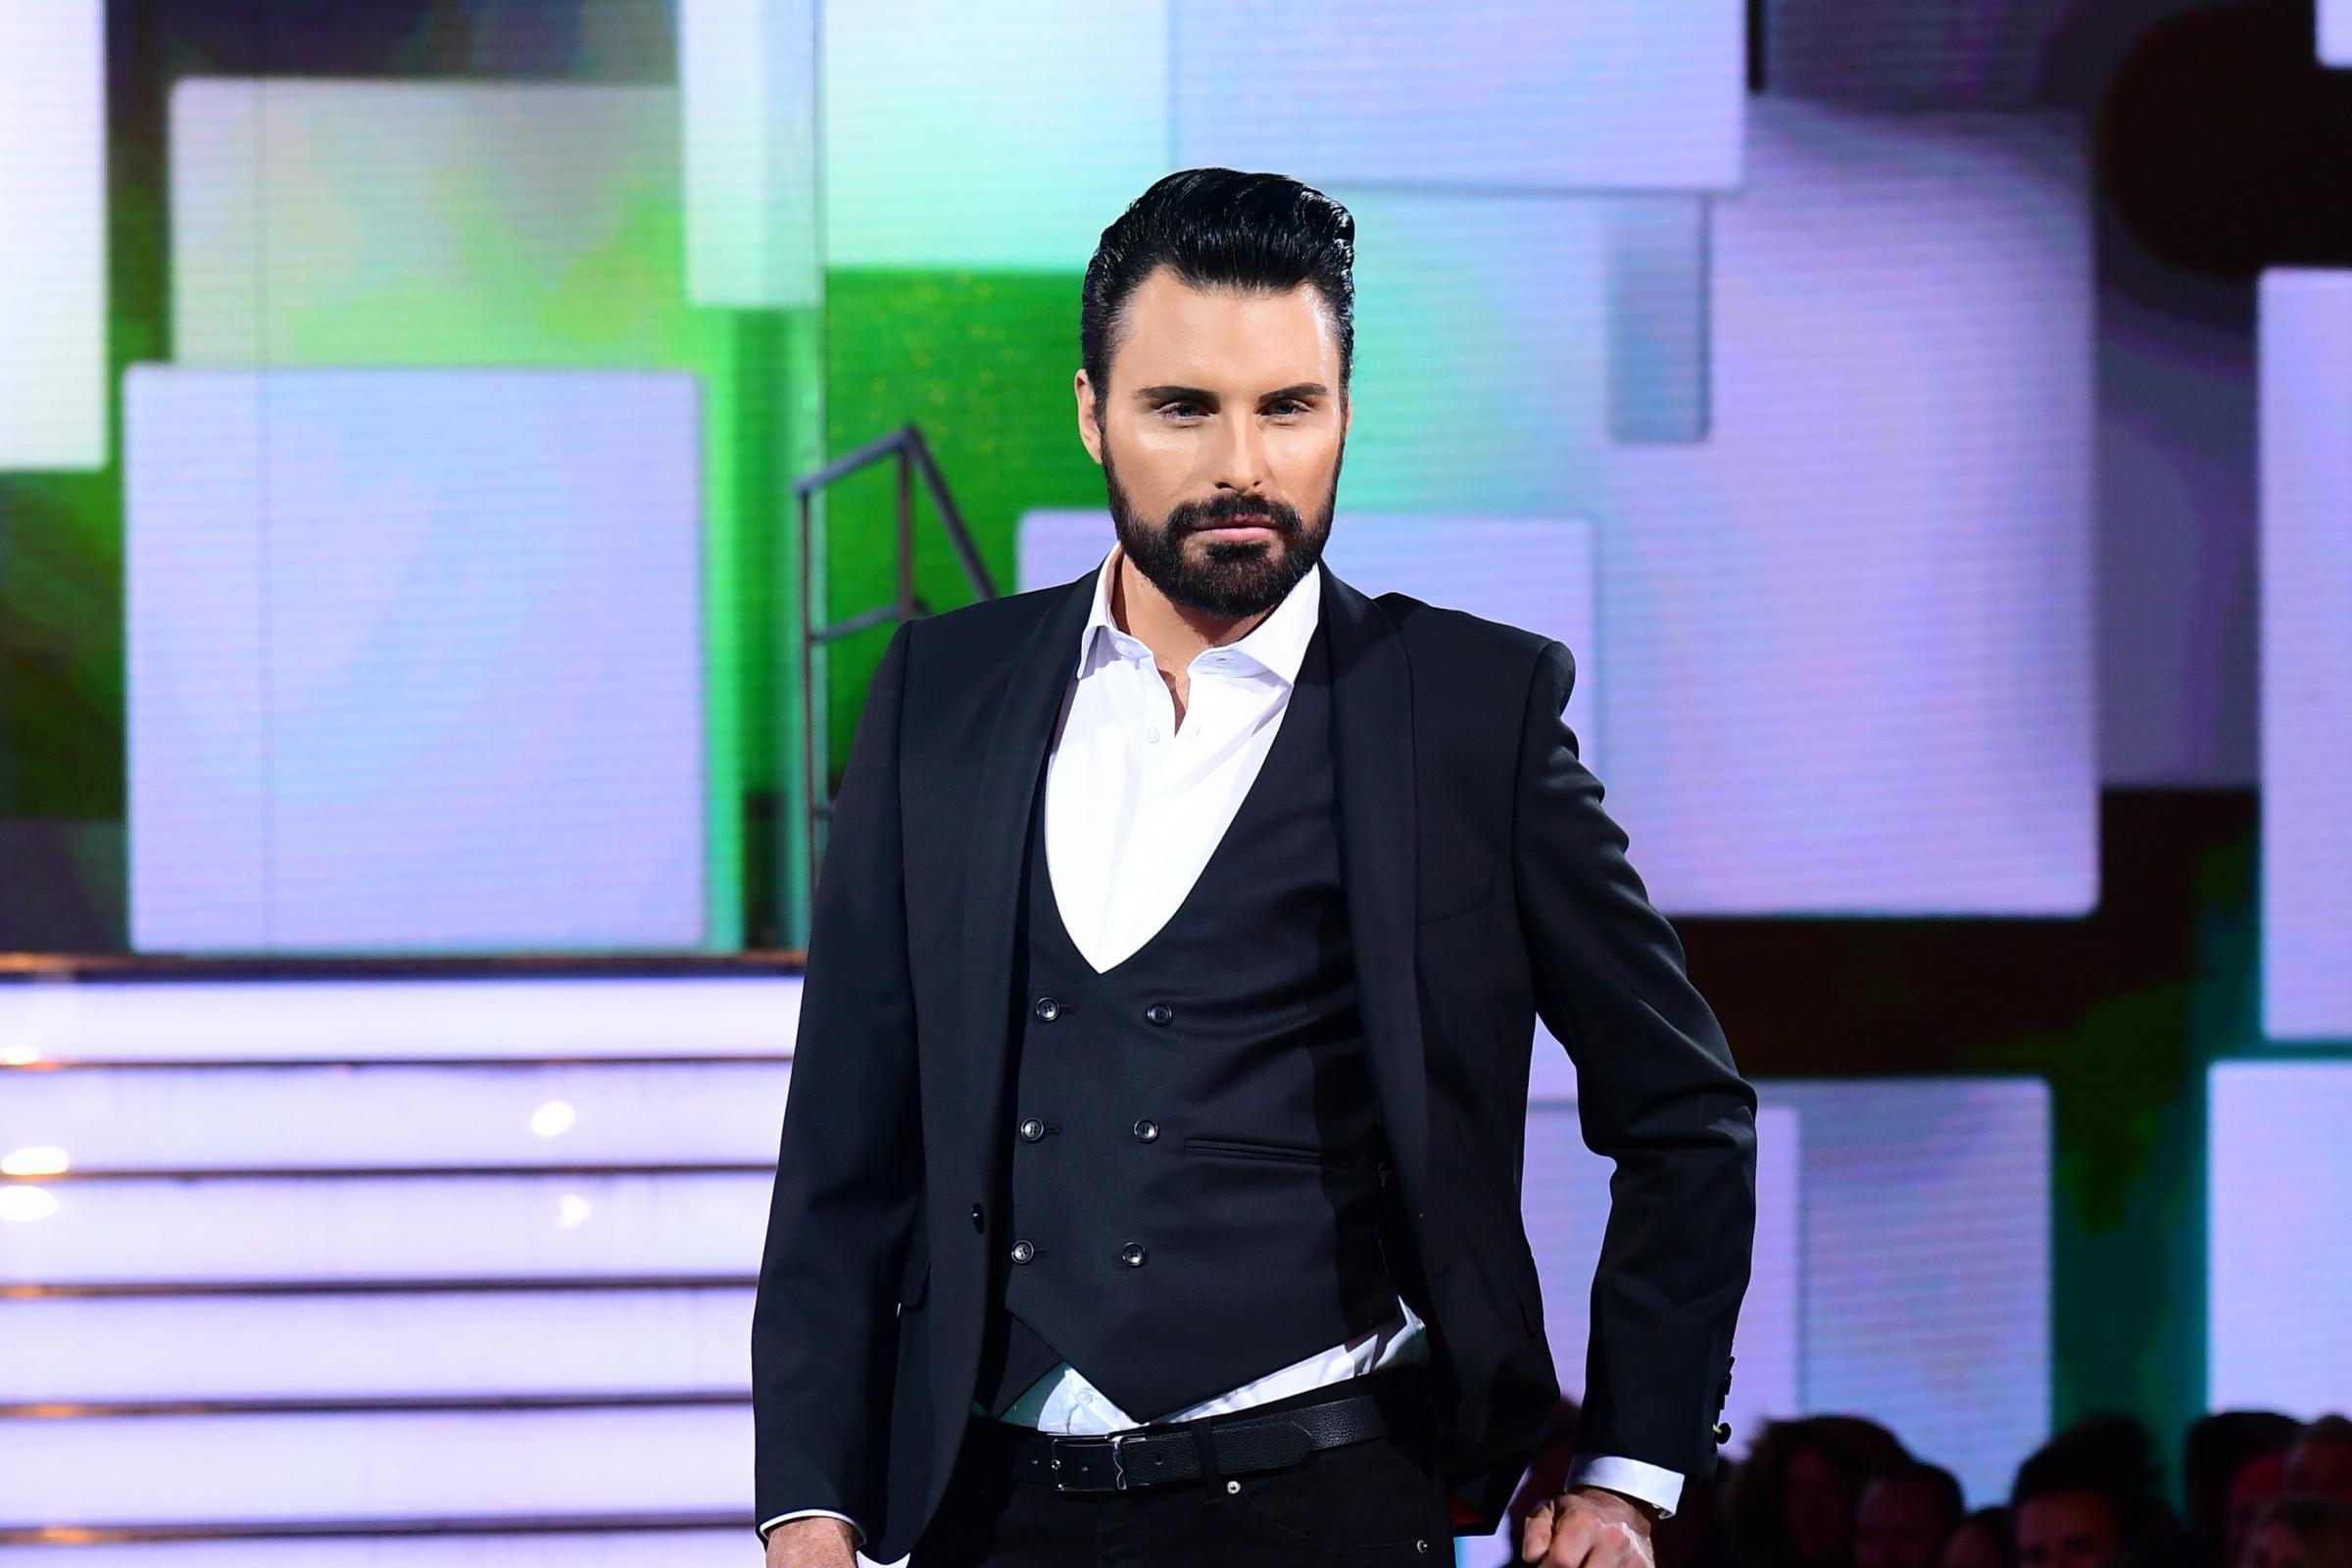 Rylan Clark Neal Calls For Twitter Verification Process To Weed Out Trolls The Mail